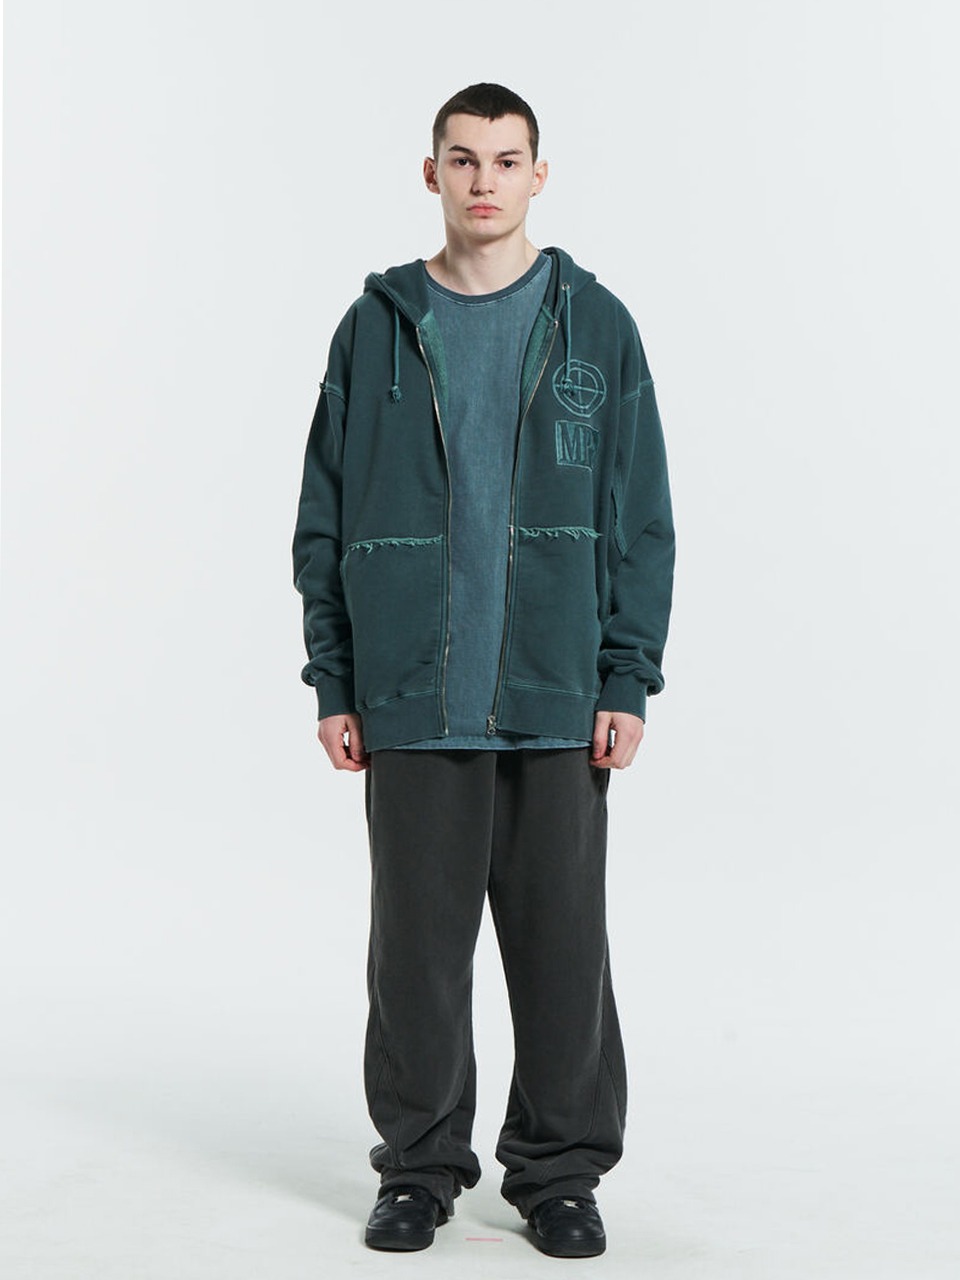 PLASTICPRODUCT - MPa SCRATCHED ZIPPED HOODIE (DARK GREEN)